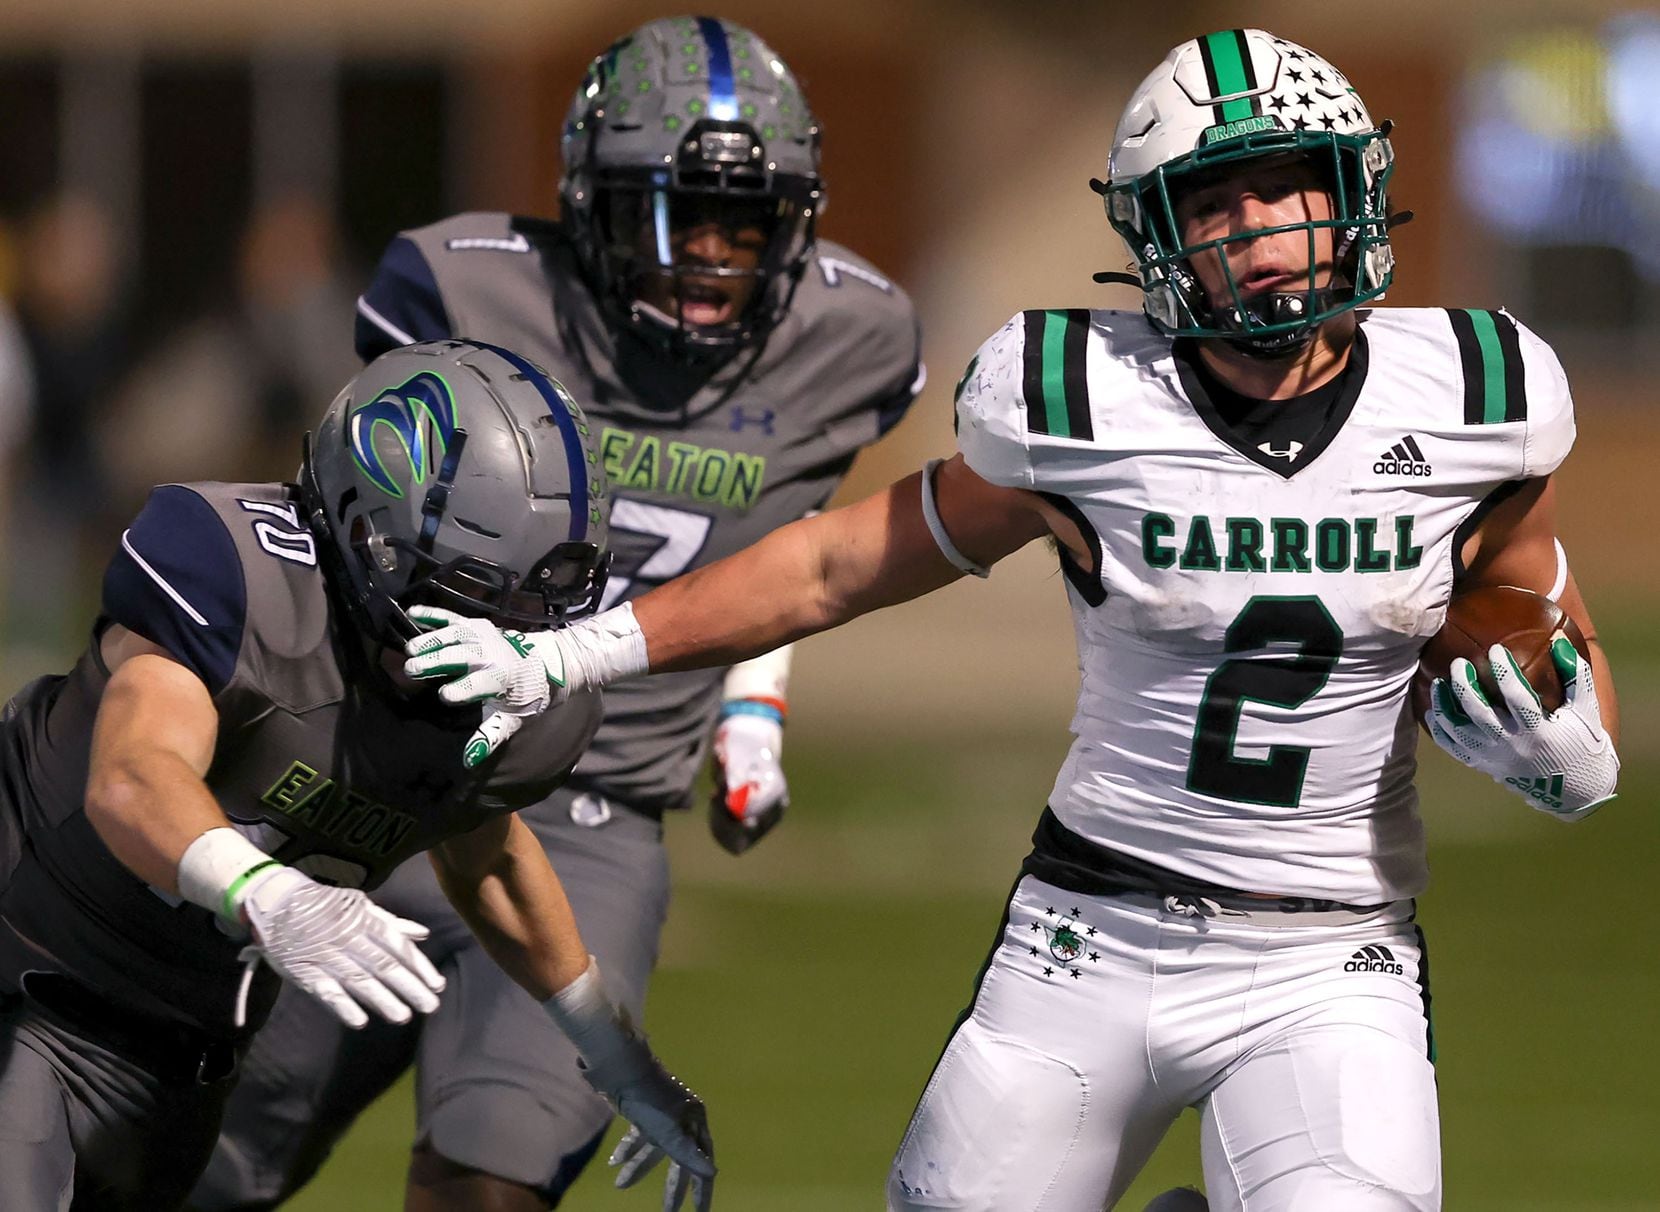 Southlake Carroll running back Owen Allen (2) gives a stiff arm to Eaton safety Aric Wood...